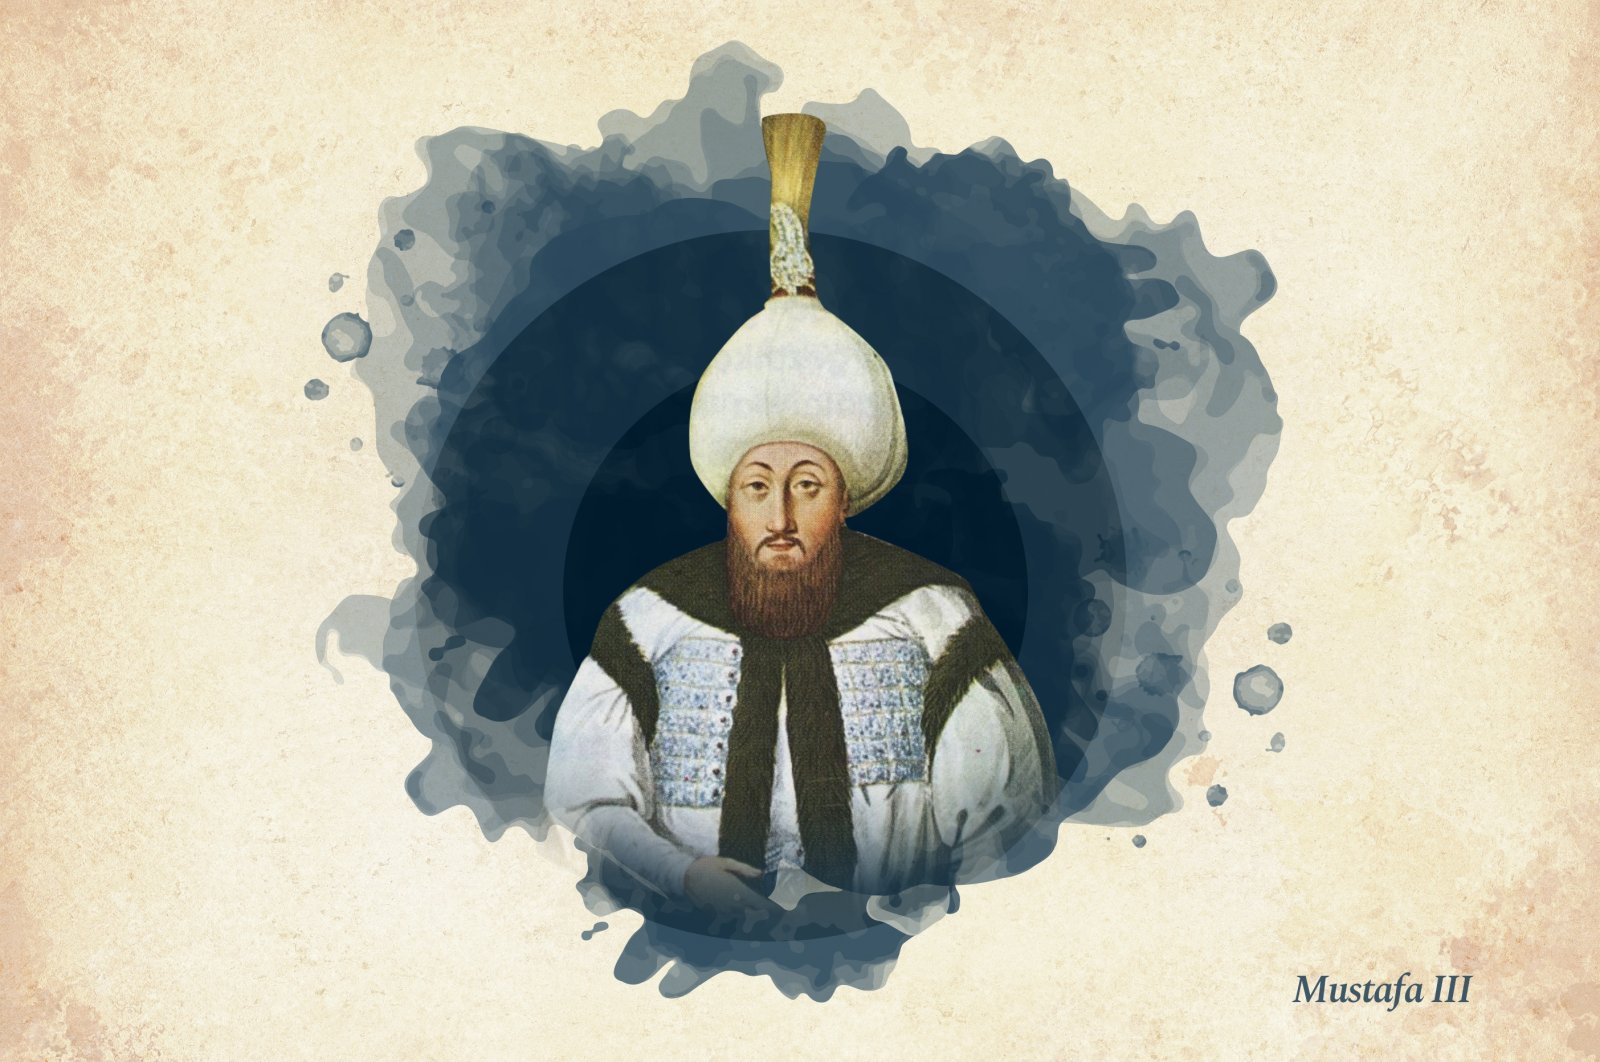 This widely used illustration shows Sultan Mustafa III, the 26th ruler of the Ottoman Empire. (Wikimedia/ Edited by Büşra Öztürk)